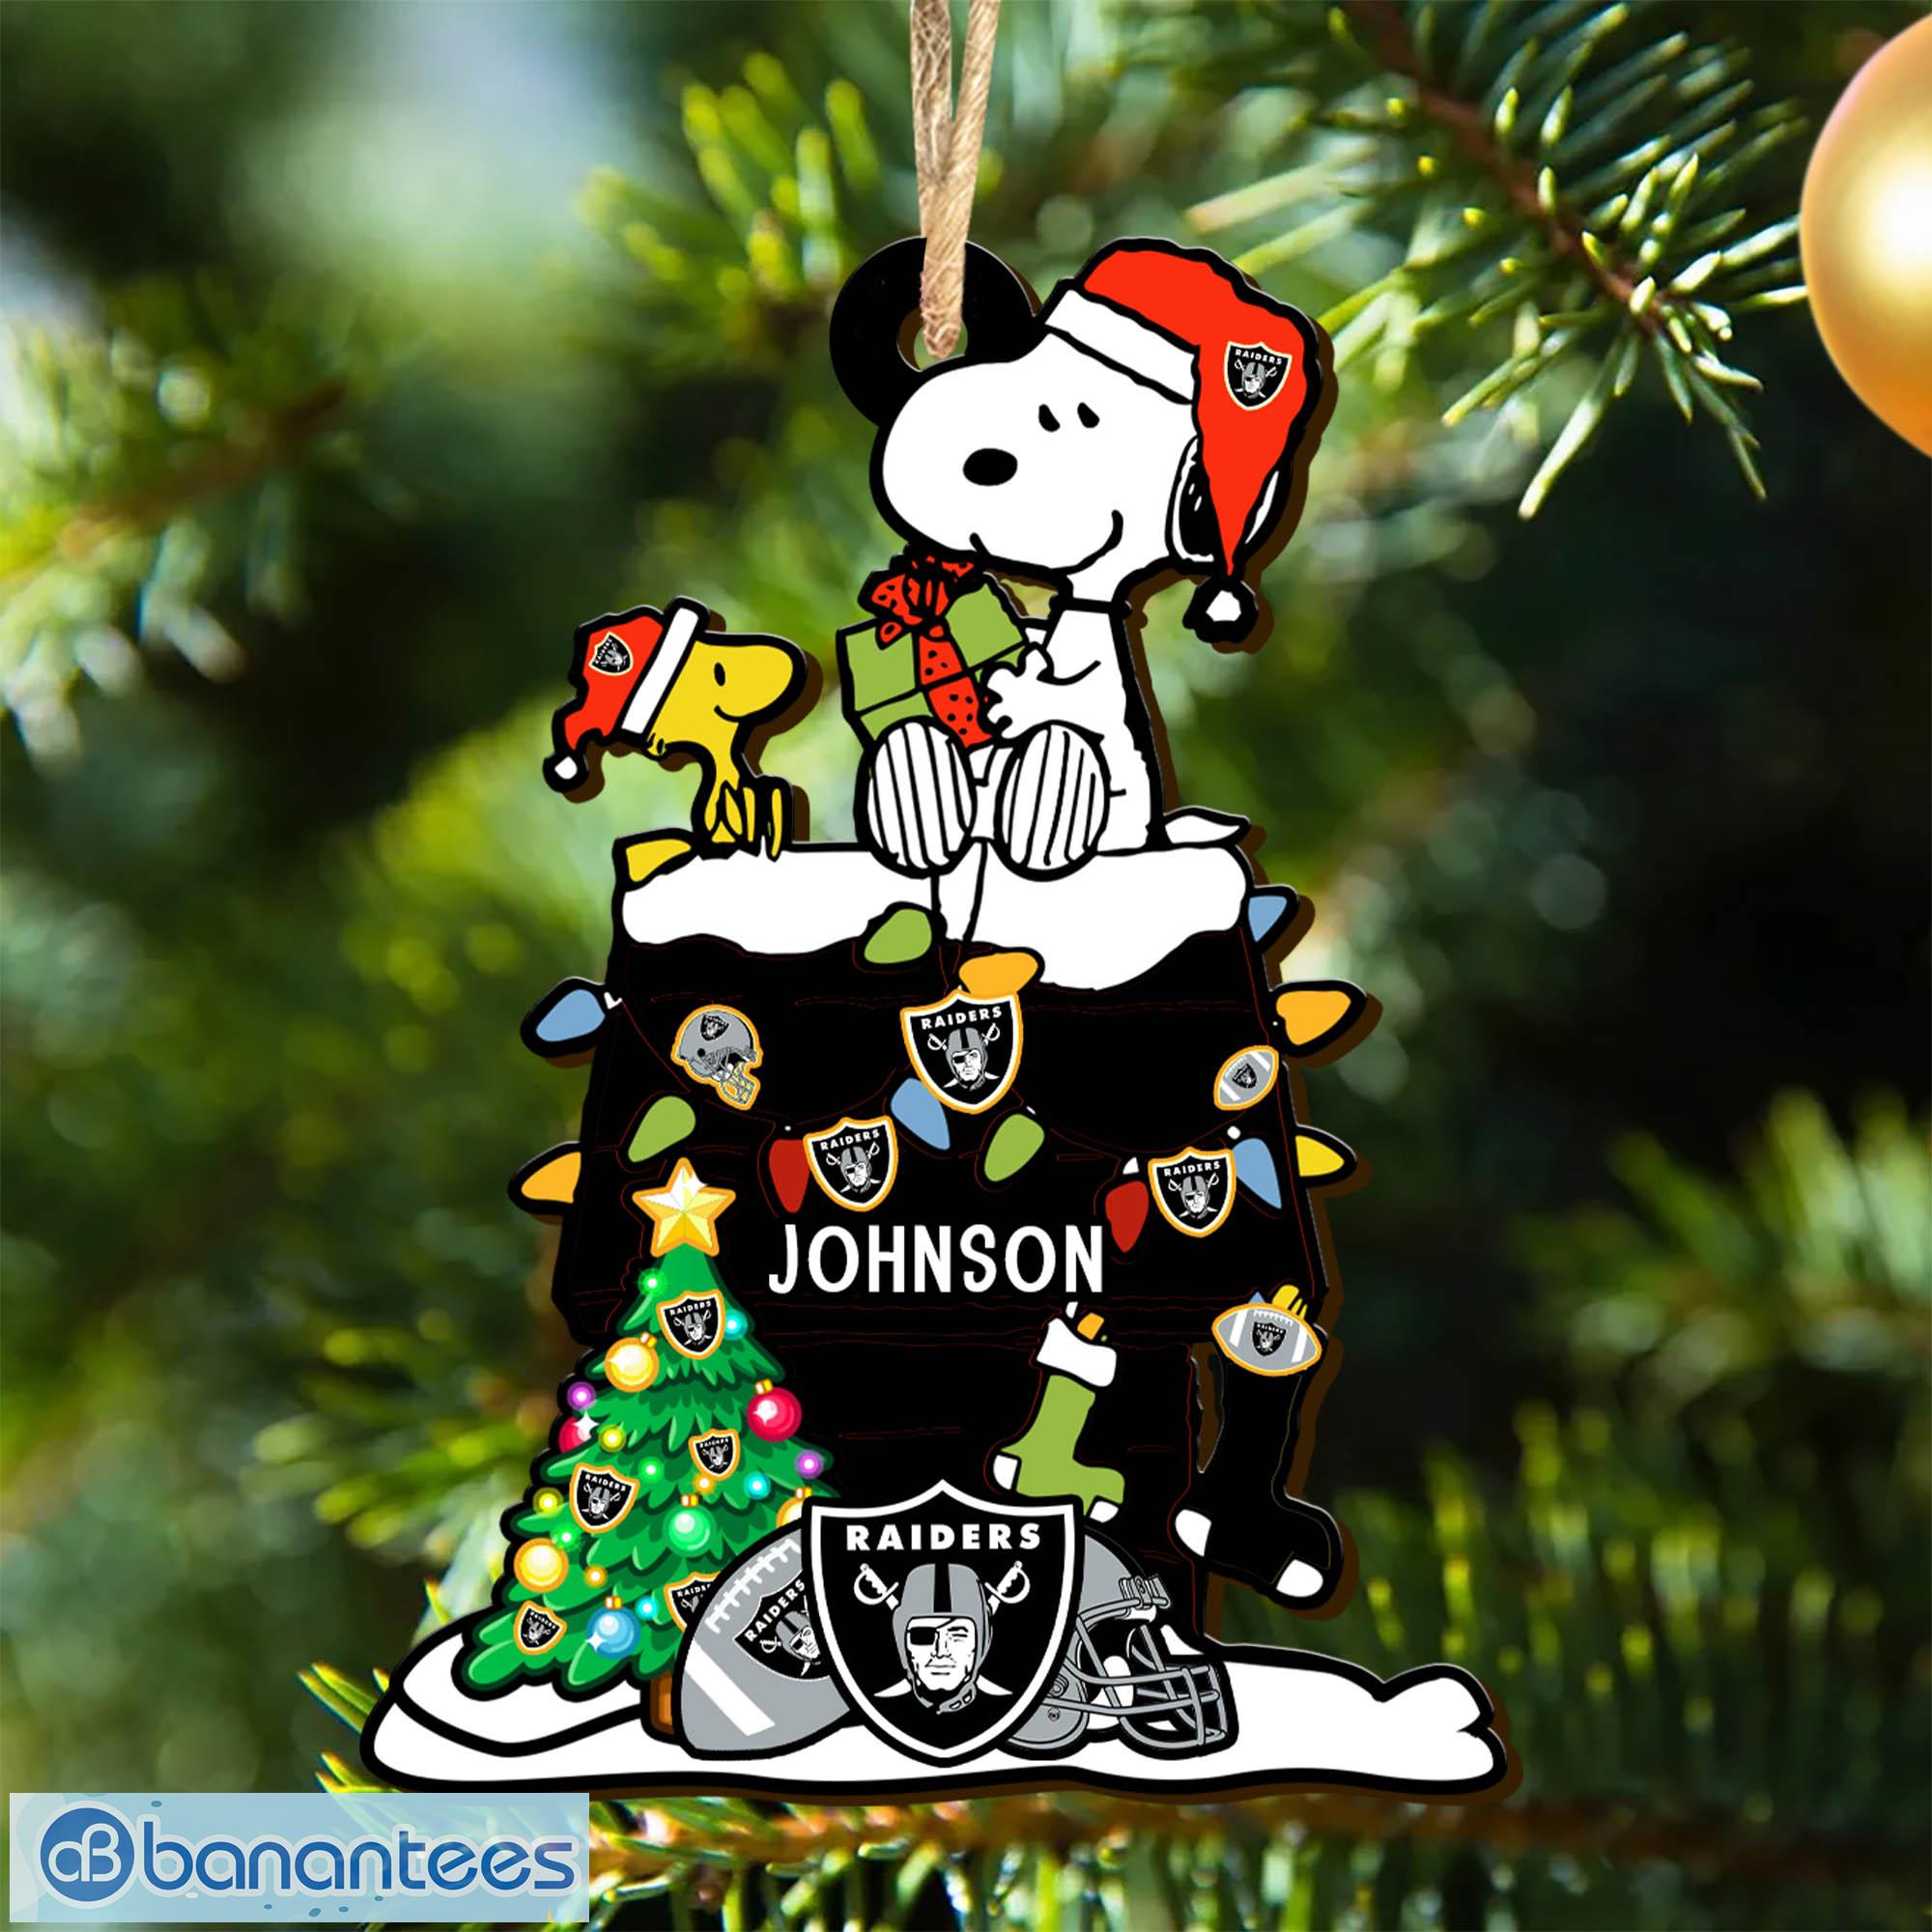 Las Vegas Raiders Custom Snoopy Peanuts Christmas Ornament Xmas Tree  Decorations - The best gifts are made with Love